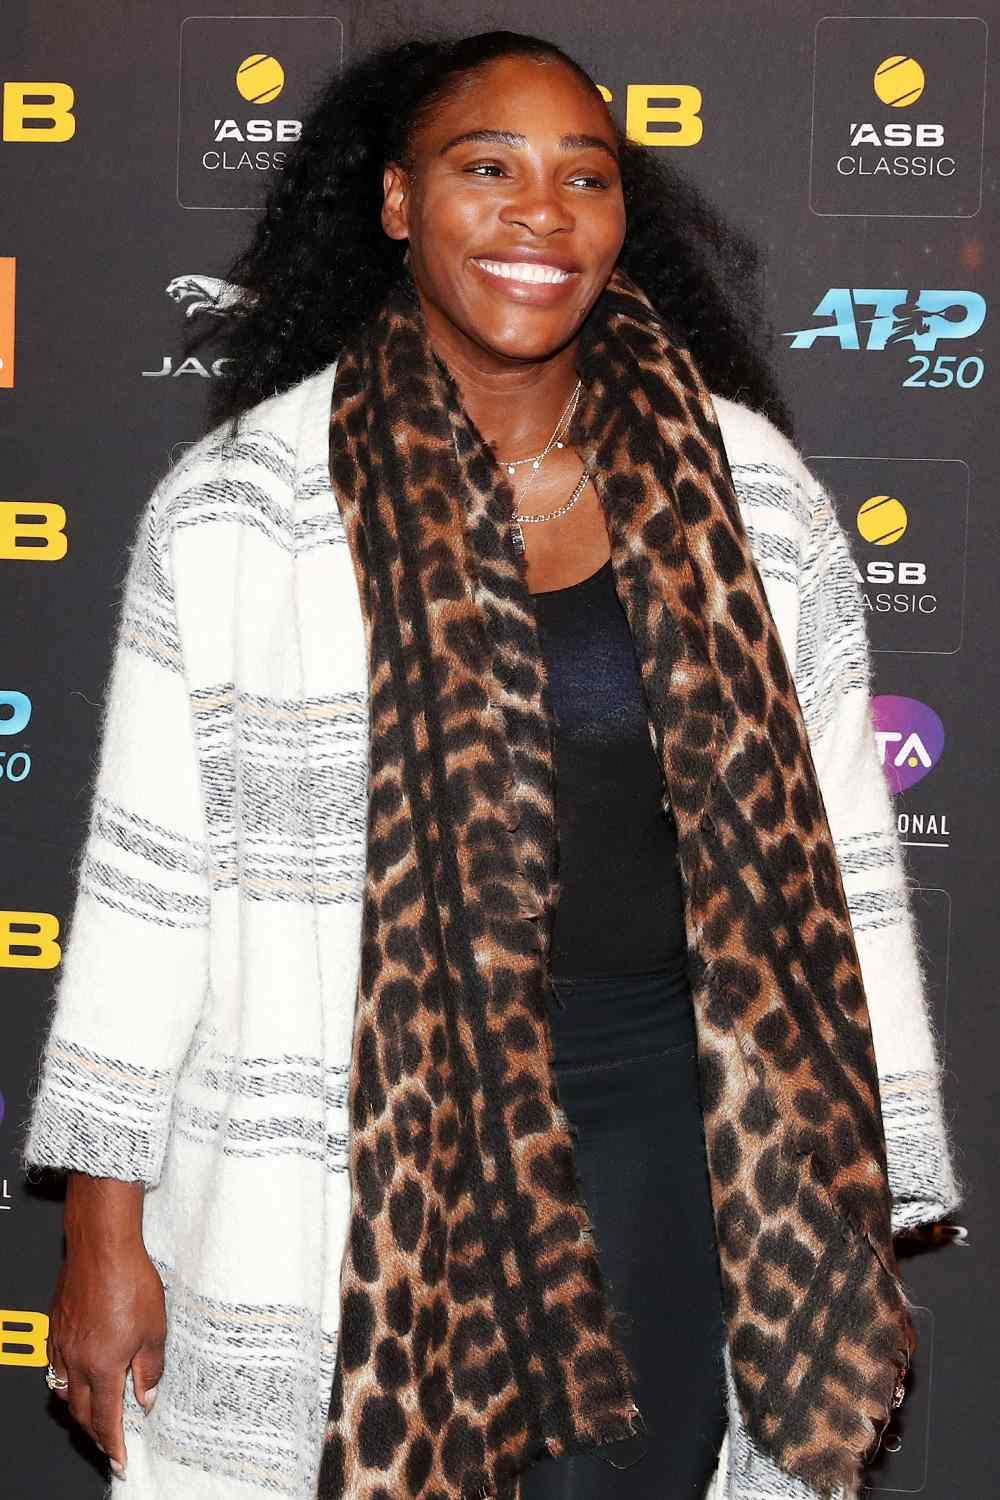 Serena Williams poses for a photograph during the 2020 ASB Classic Players Party at Soul Bar on January 05, 2020 in Auckland, New Zealand